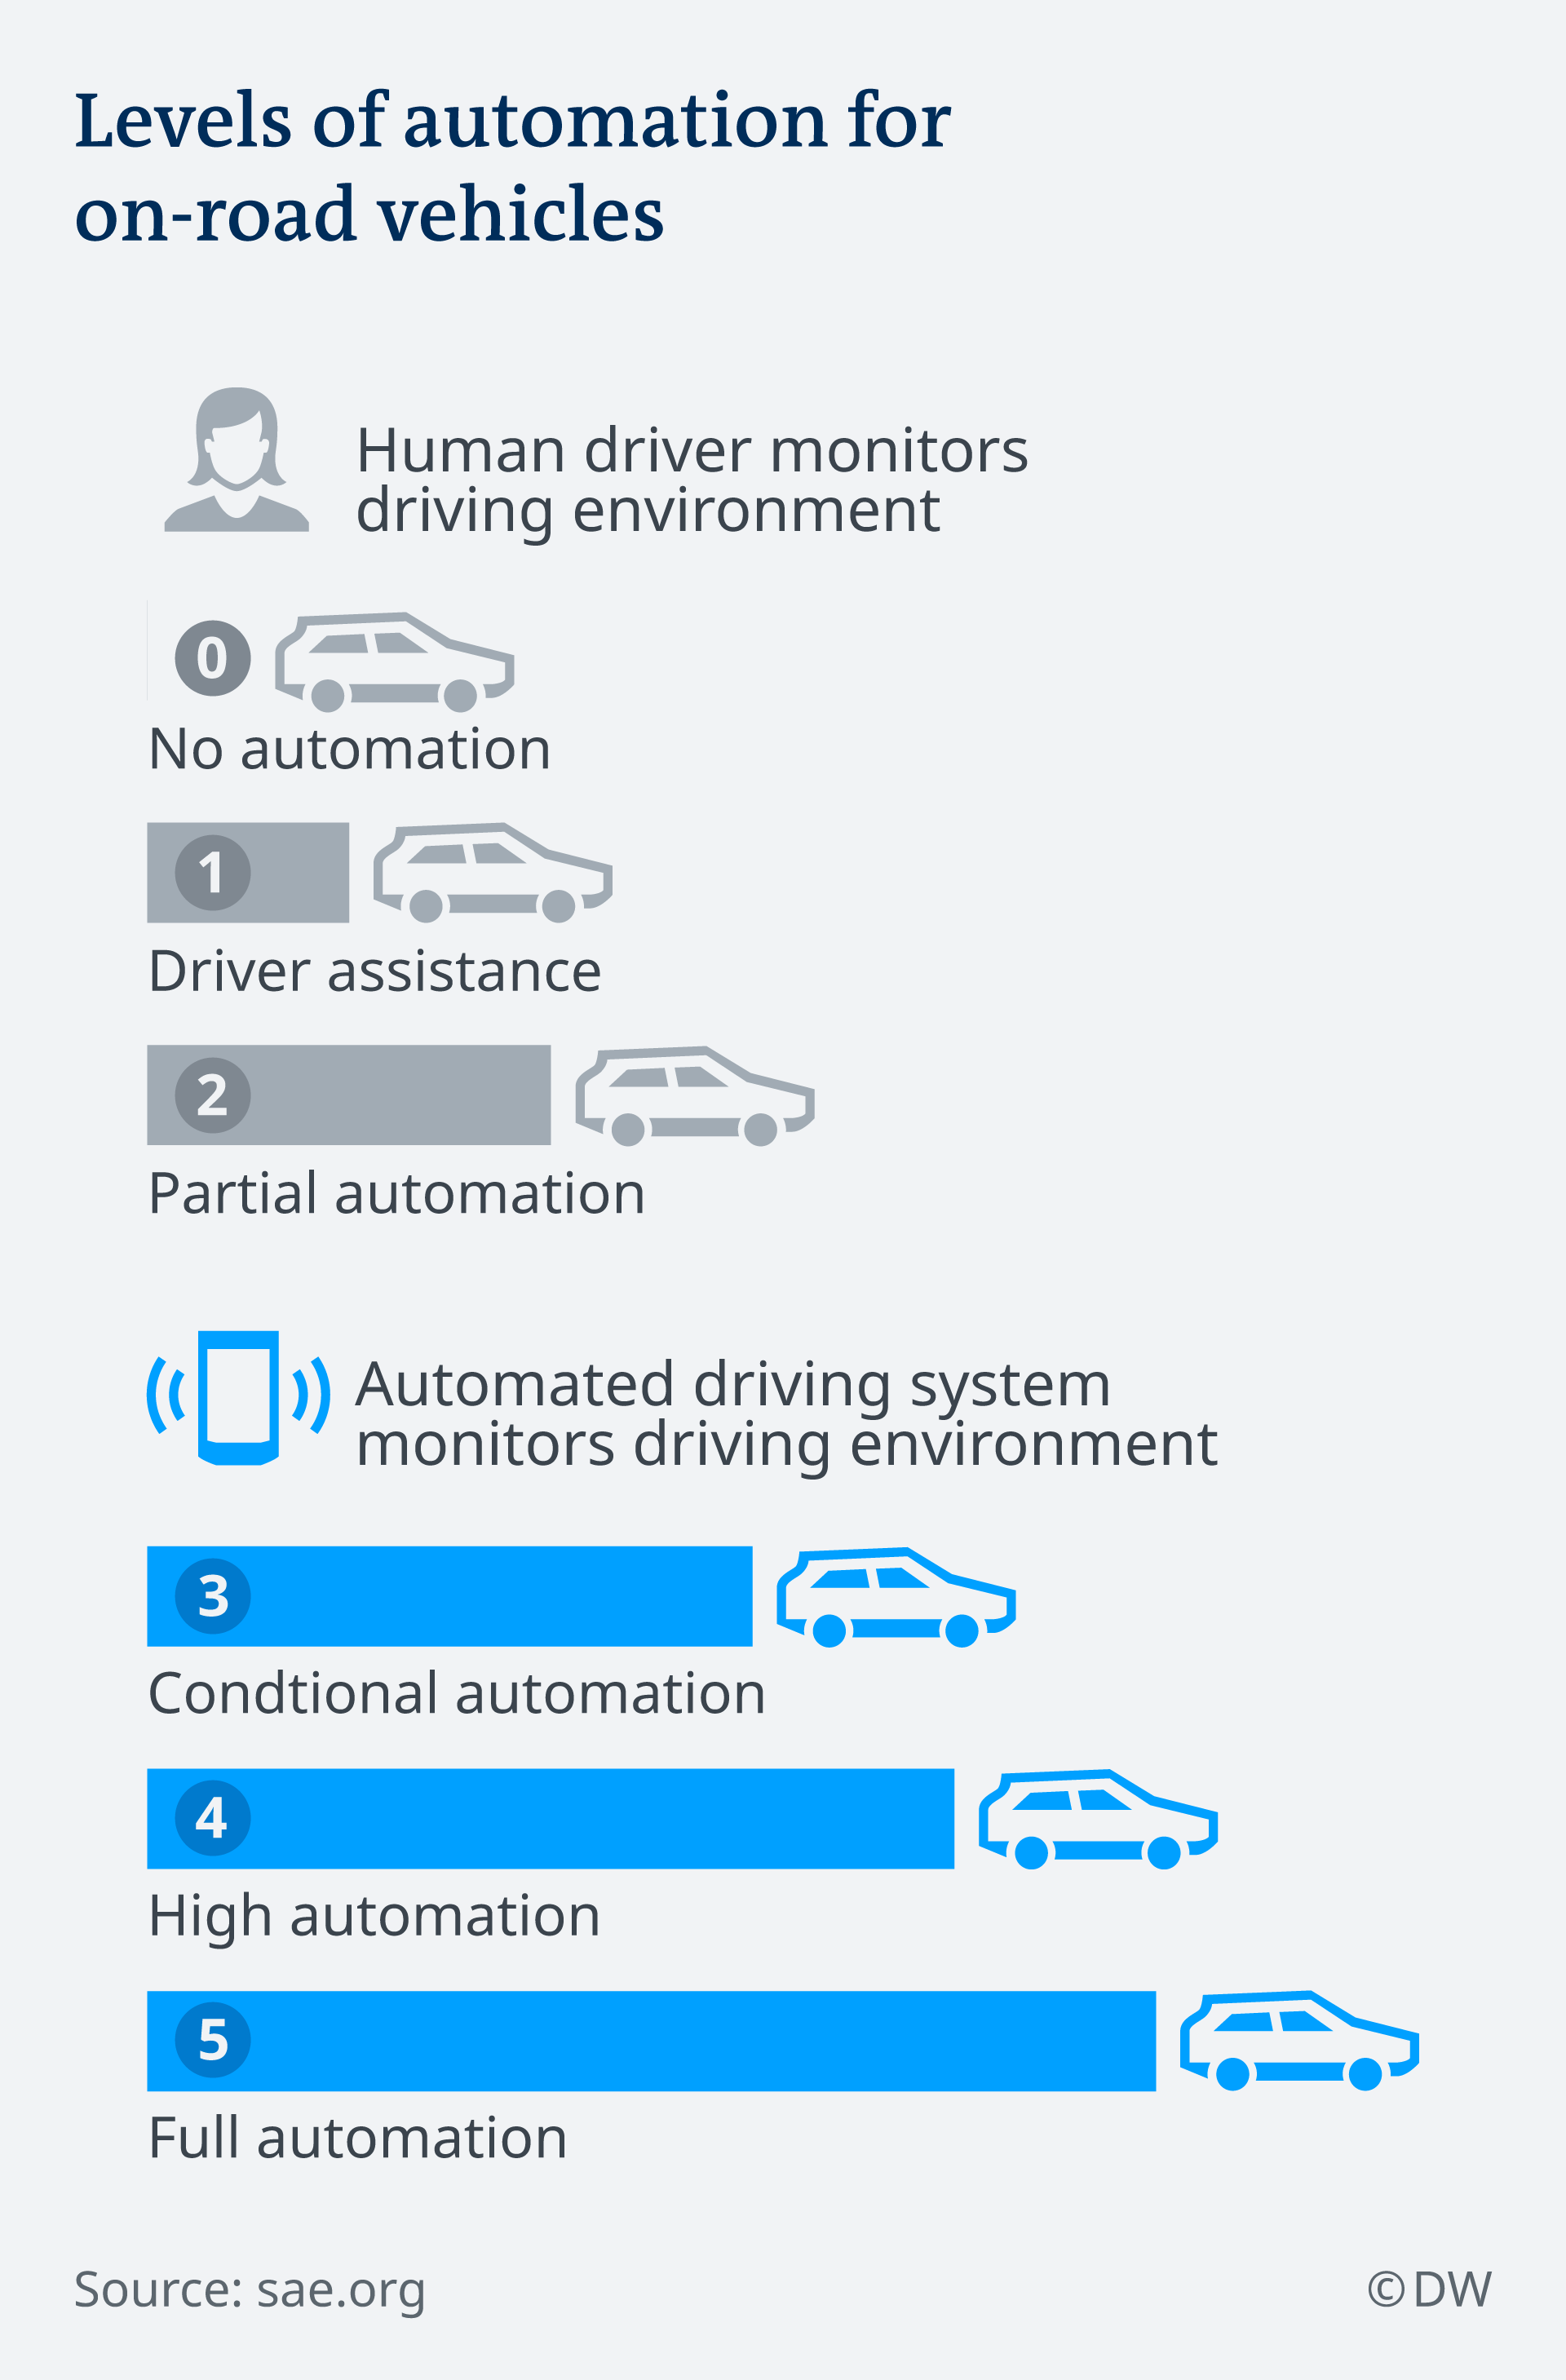 Levels of automation for vehicles